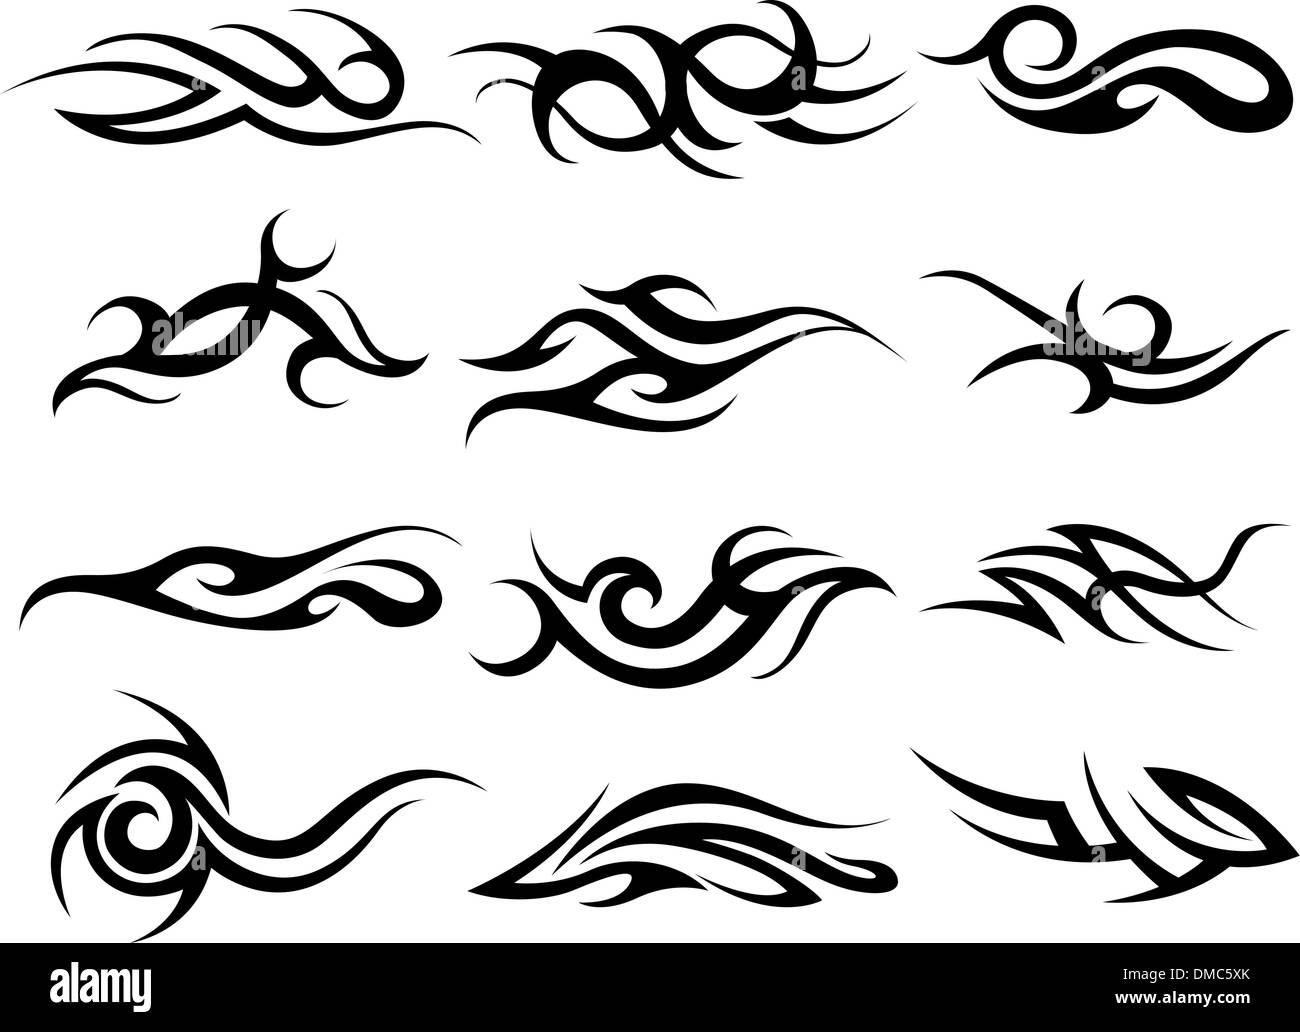 abstract scroll symbol Stock Vector Image & Art - Alamy